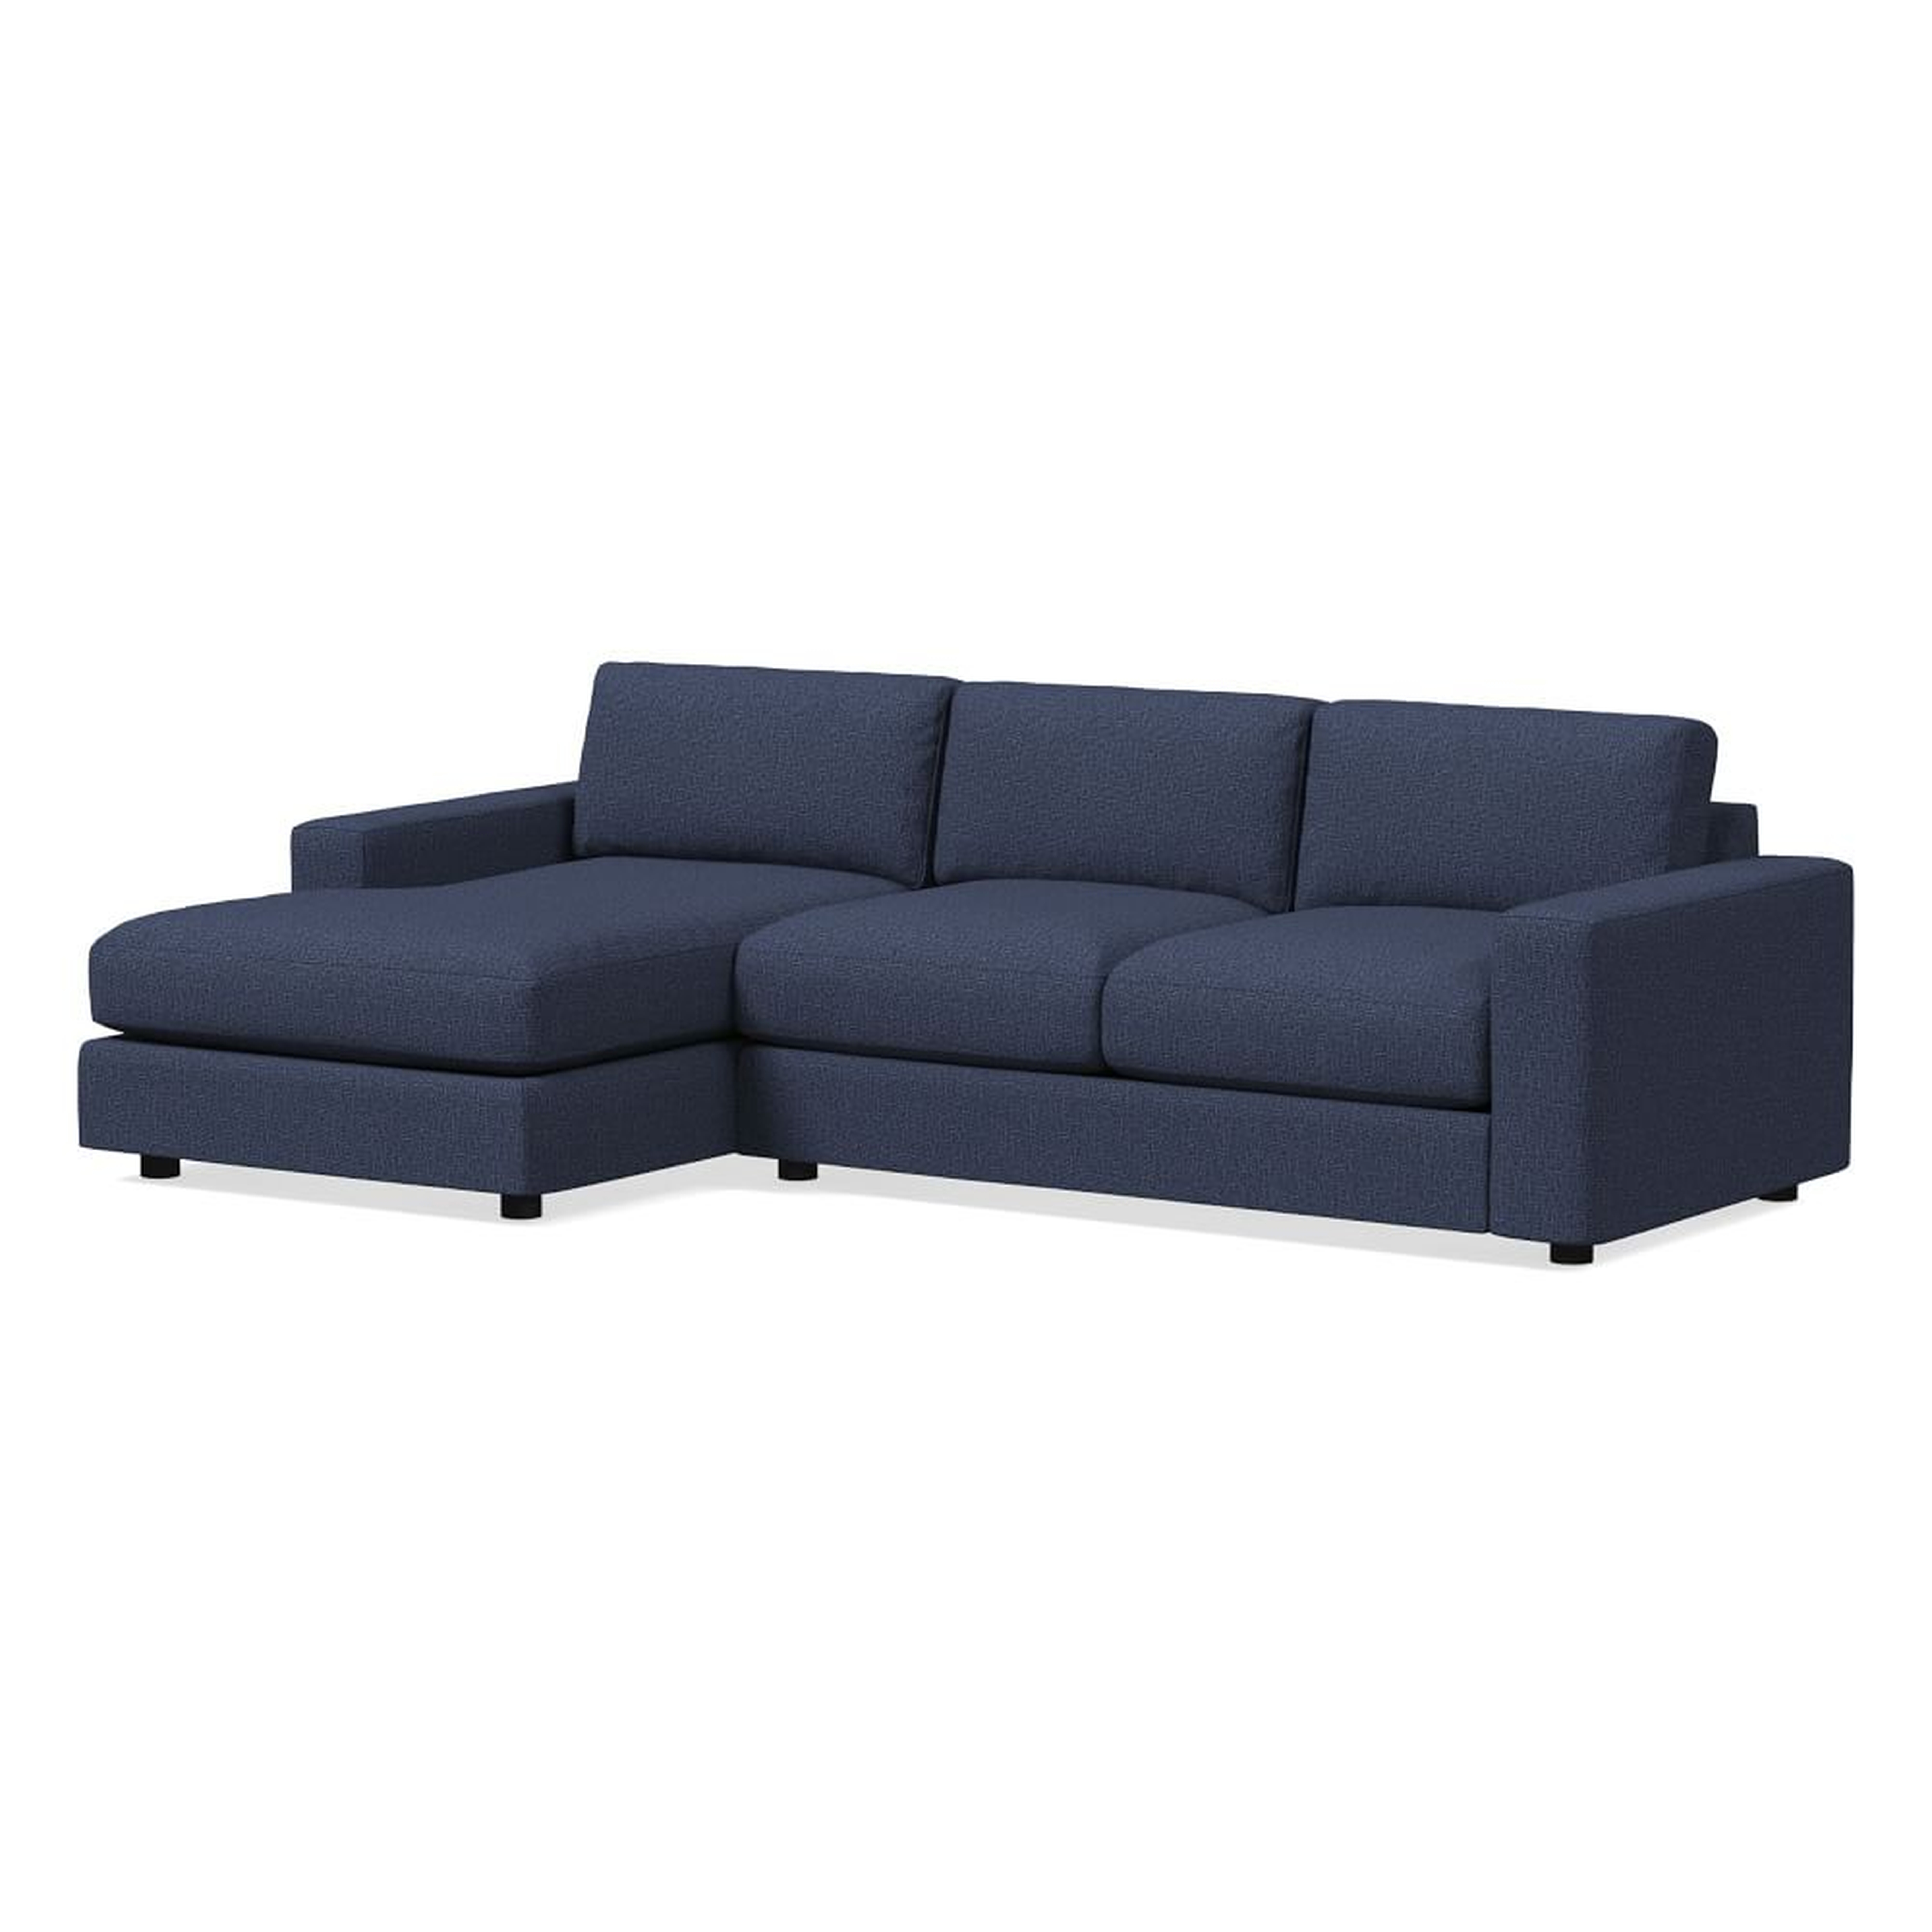 Urban 106" Left 2-Piece Chaise Sectional, Deco Weave, Midnight, Poly-Fill - West Elm